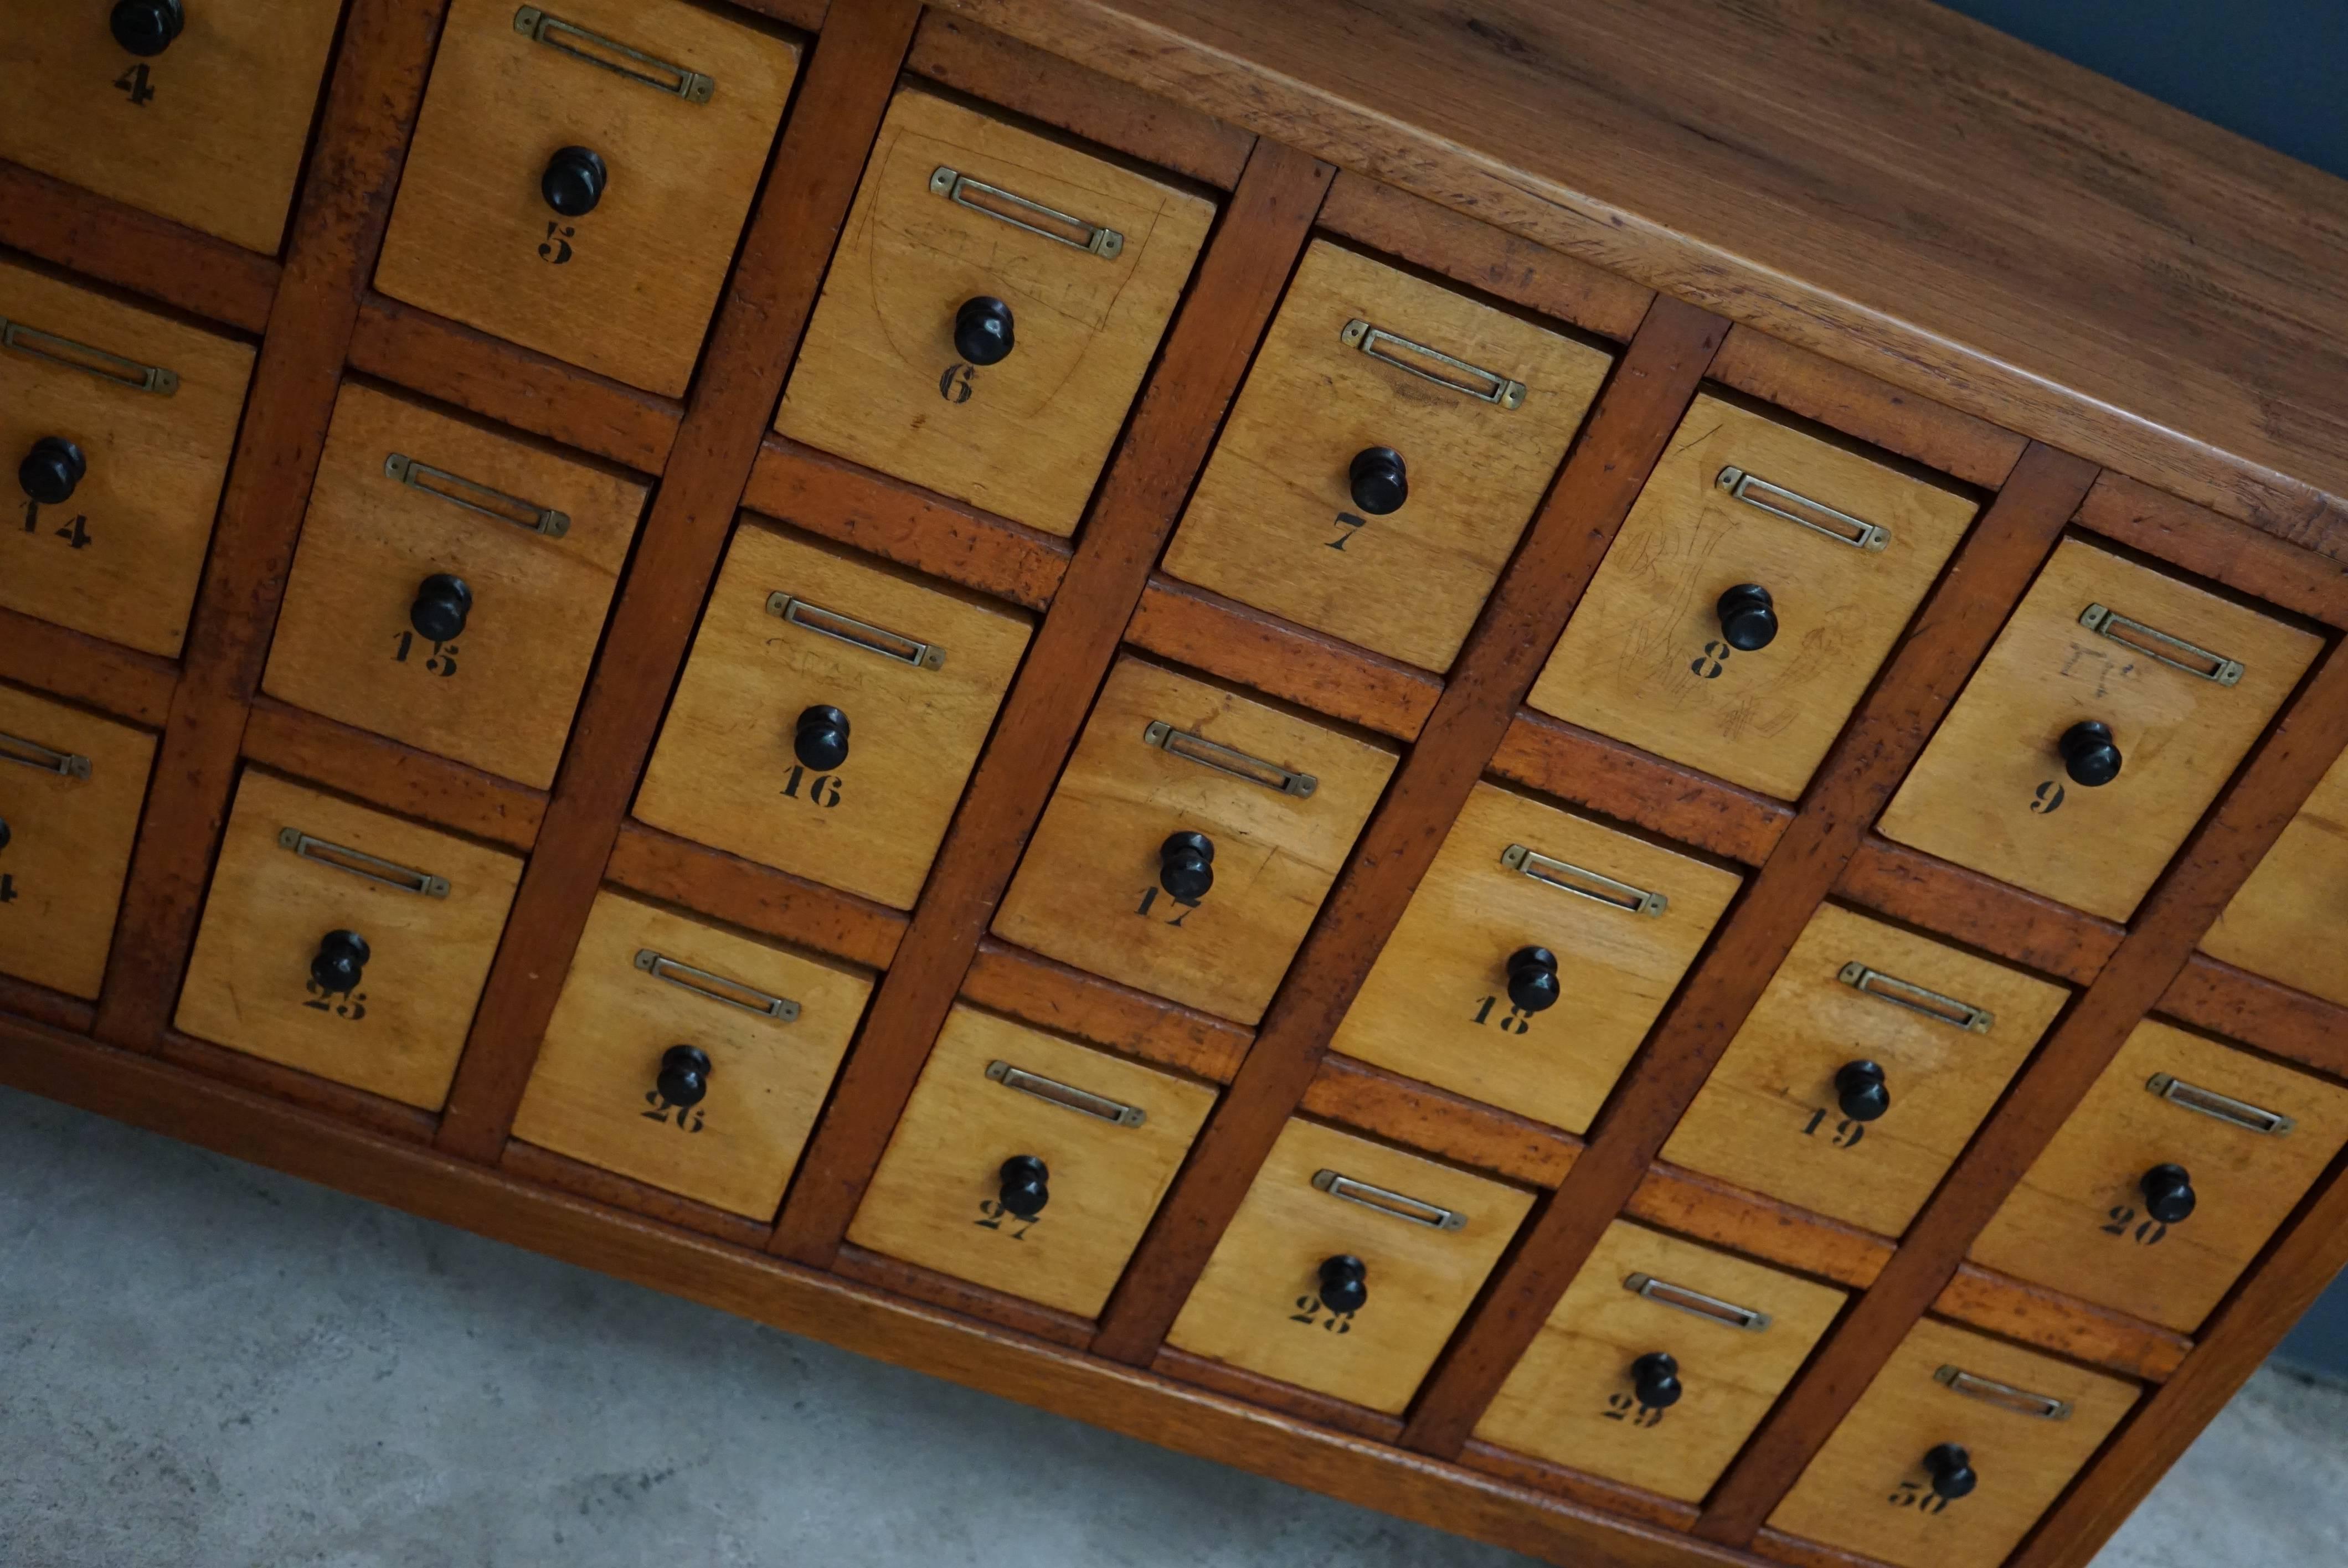 This apothecary cabinet of drawers was designed, circa 1930s in the Netherlands. The piece is made from oak and beech and features many drawers signed with numbers.